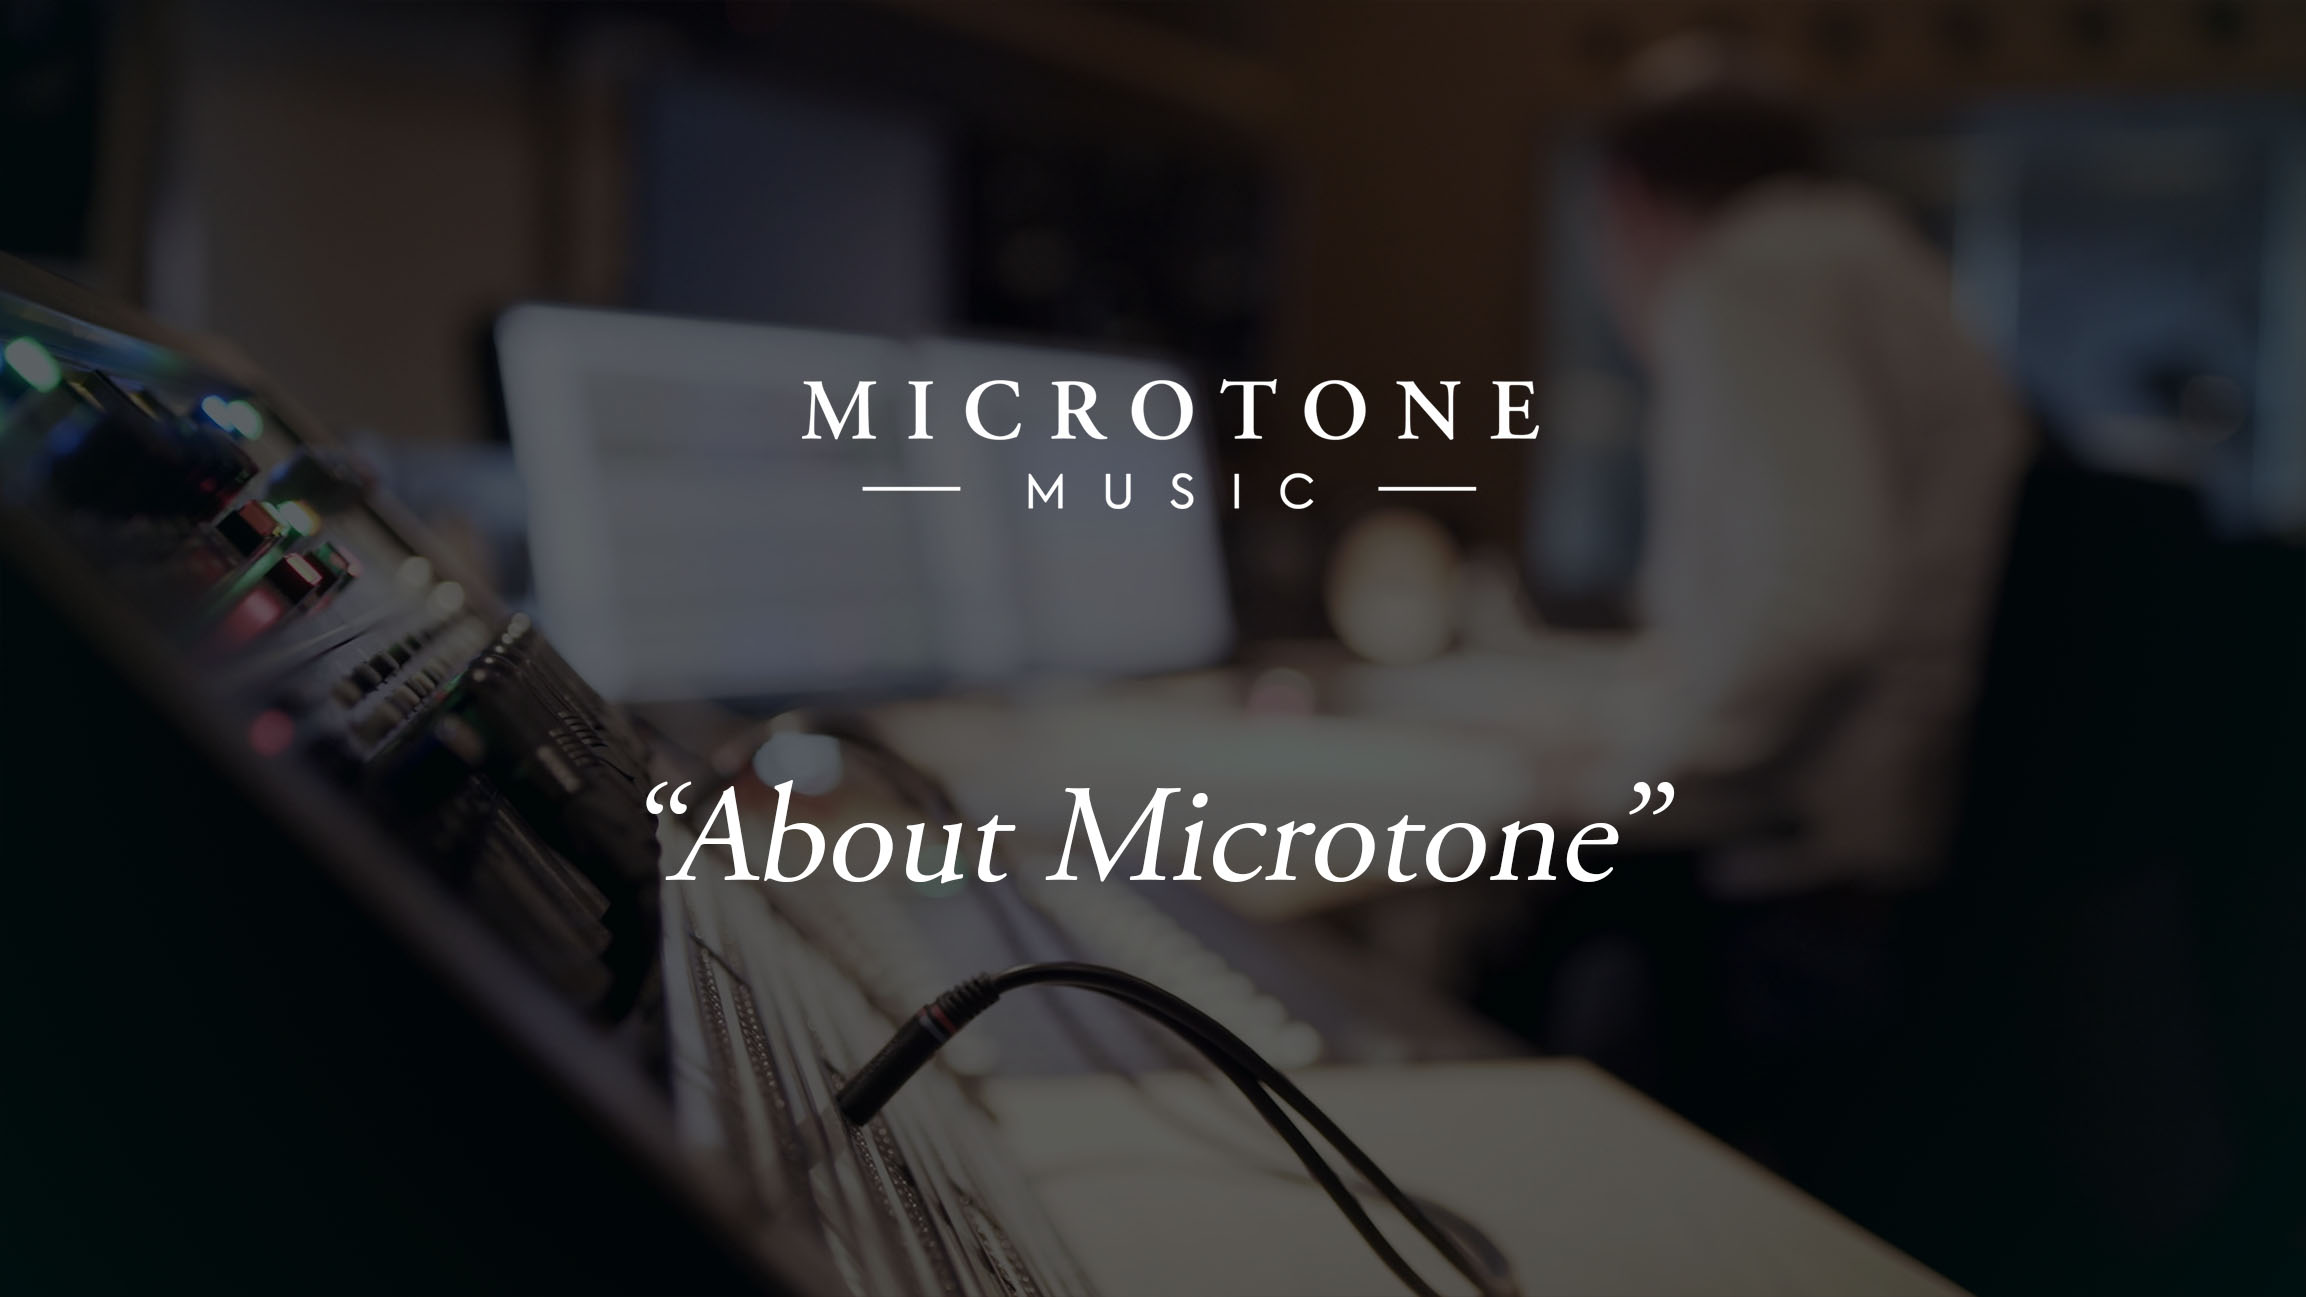 About Microtone